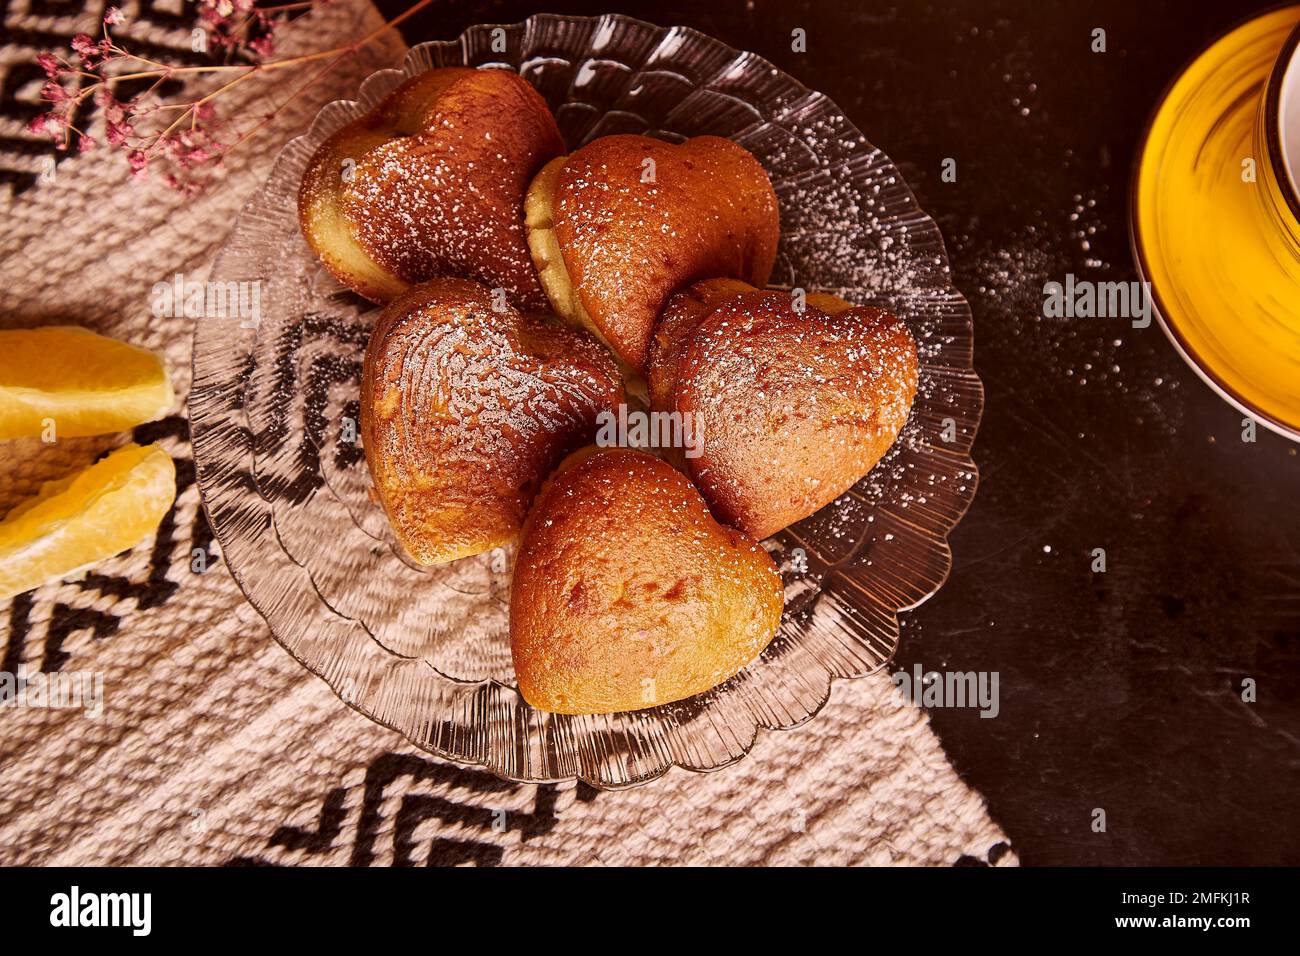 Homemade heart shaped cupcakes with orange taste for Valentines Day. Tea time aesthetics with fresh muffins. Stock Photo